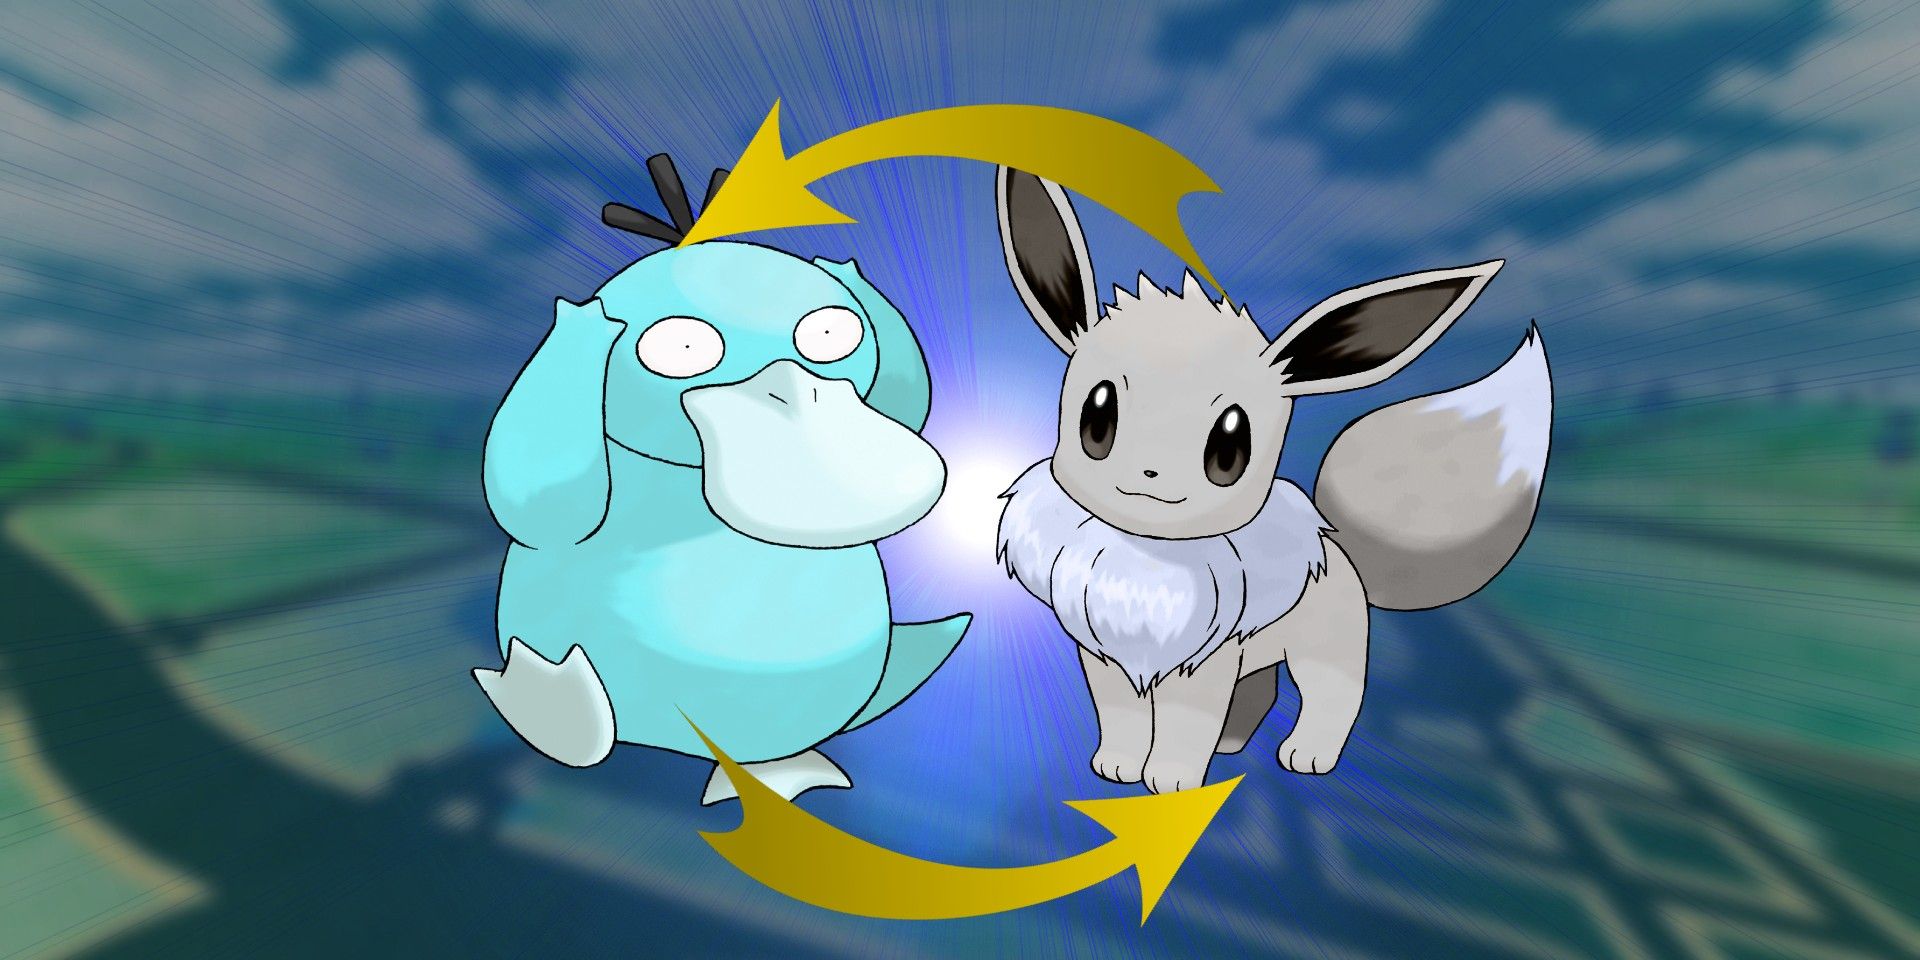 A shiny Psyduck on the left and a shiny Eevee on the right with a blue backlight behind them. Two curved yellow arrows on top of them and below them indicate trading. Blurred-out in the background is an image of the Pokémon GO map.